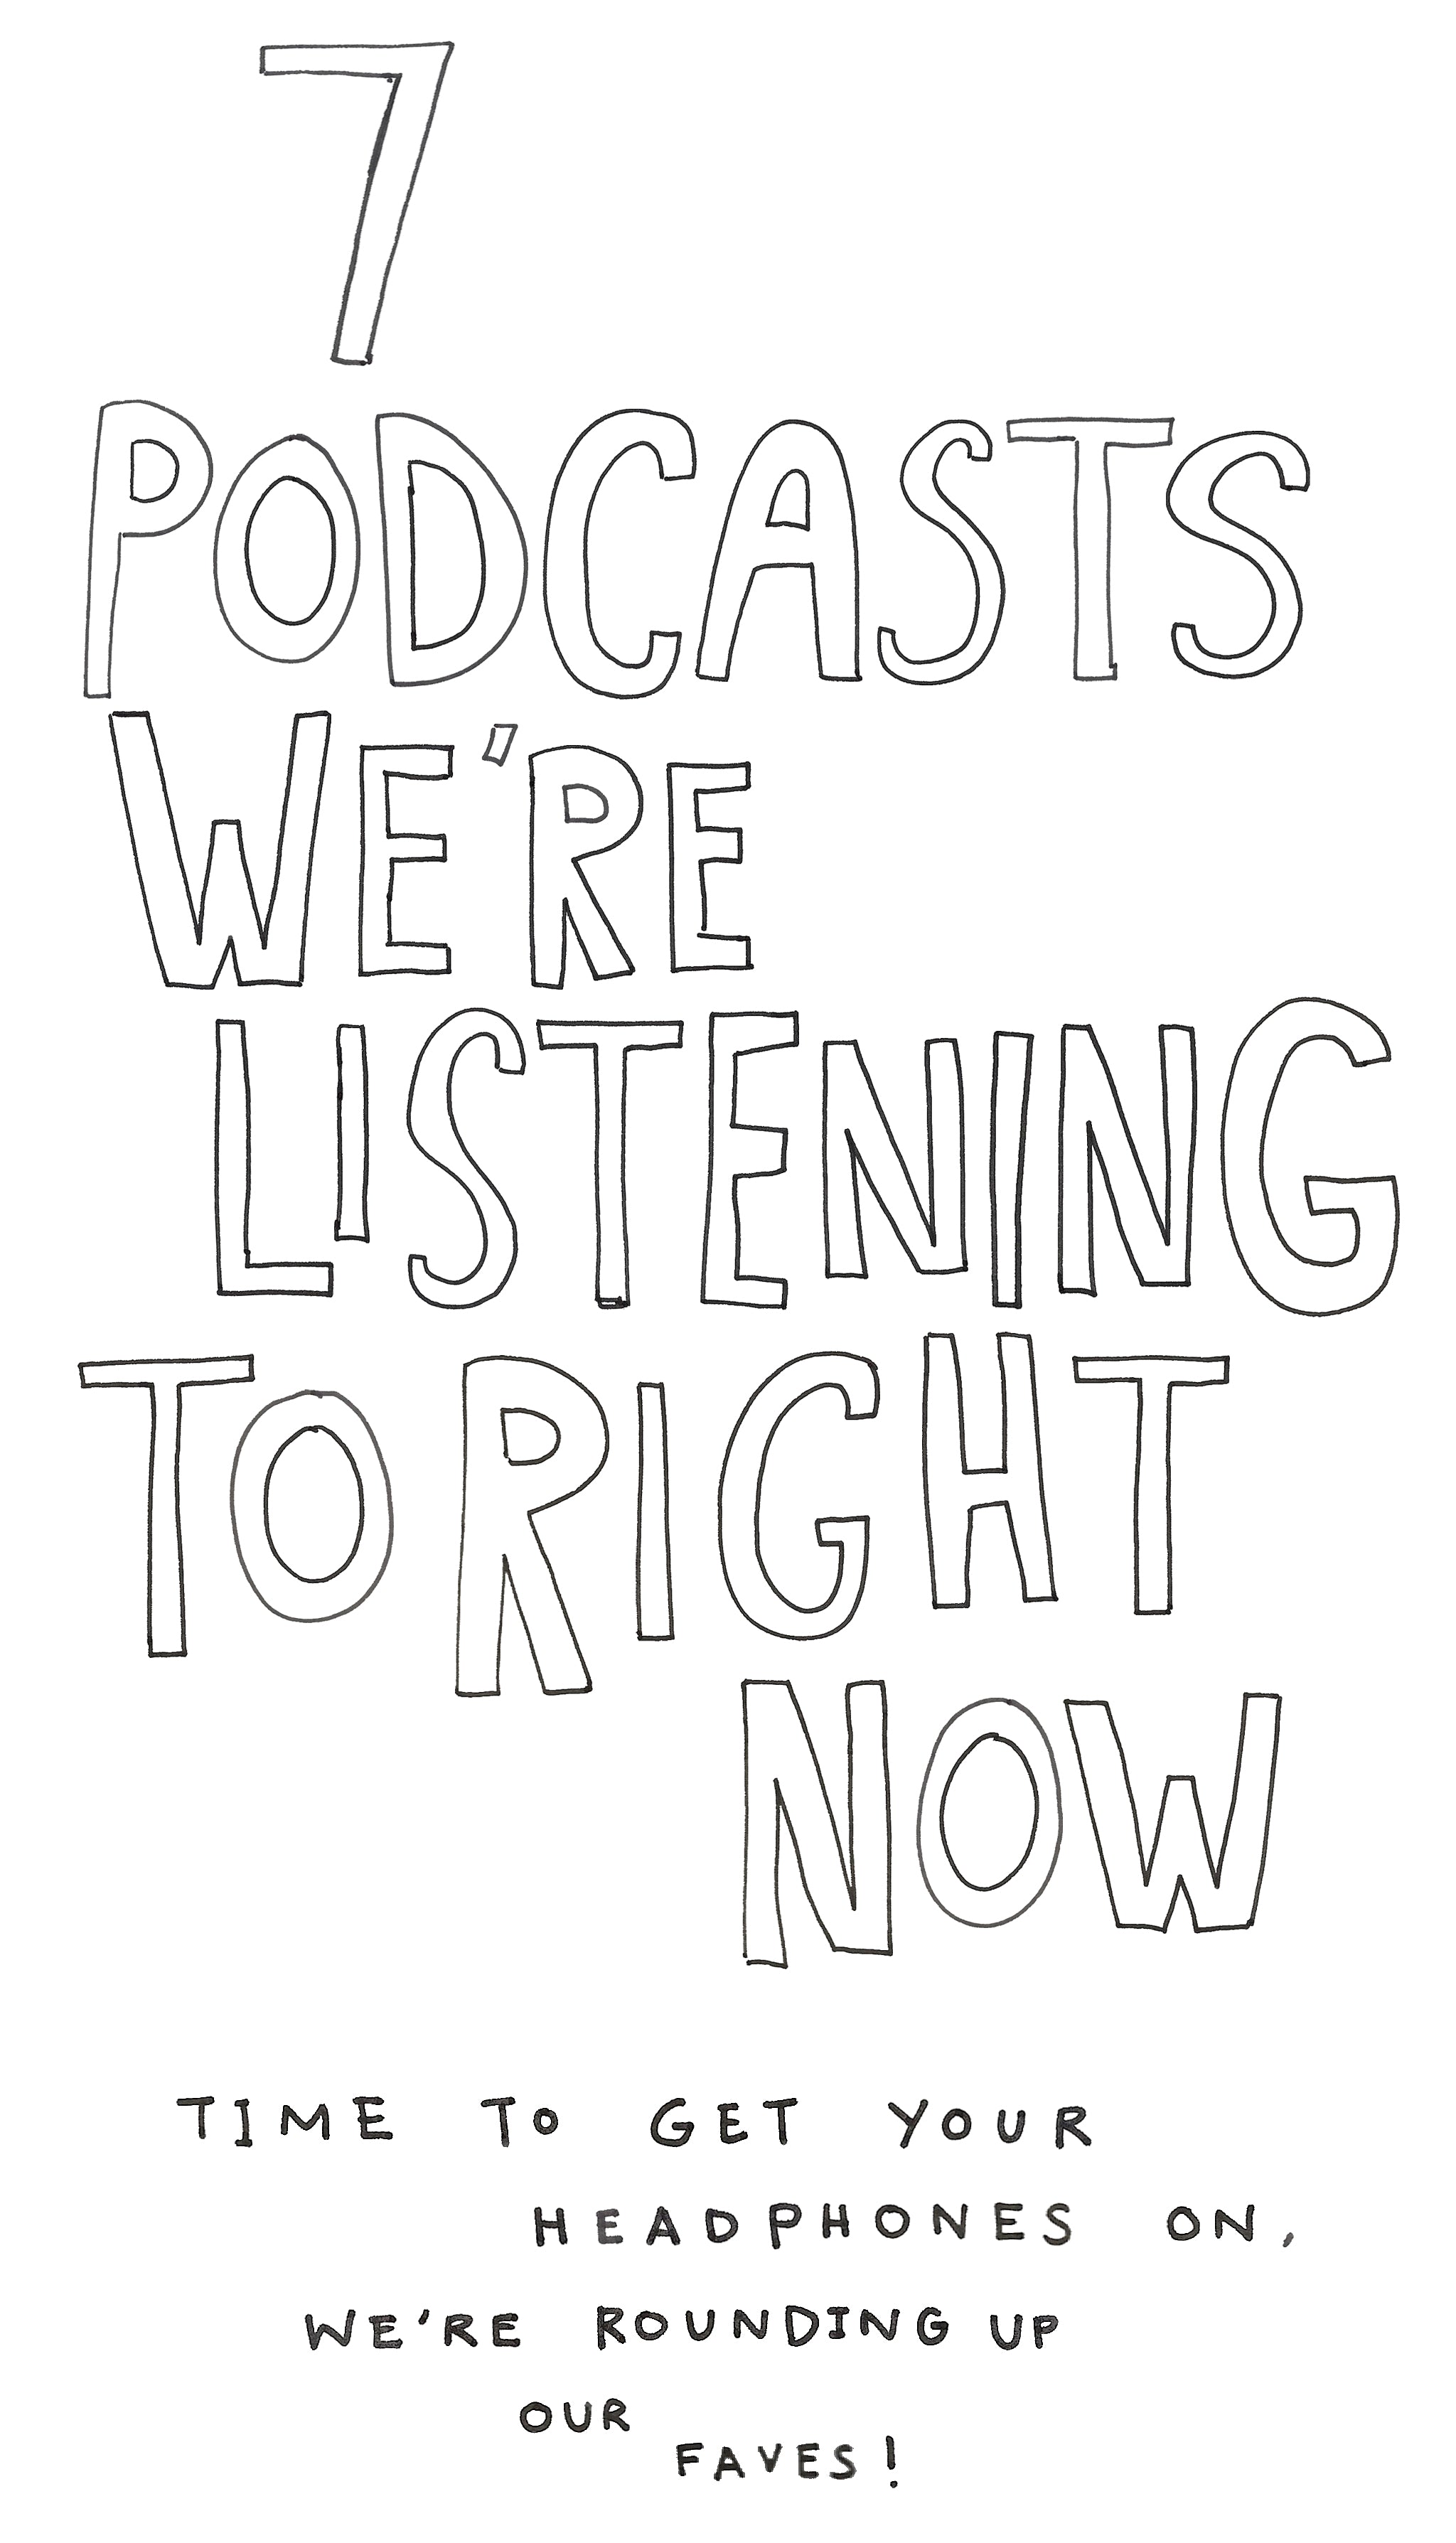 7 Podcasts We're Listening To Right Now